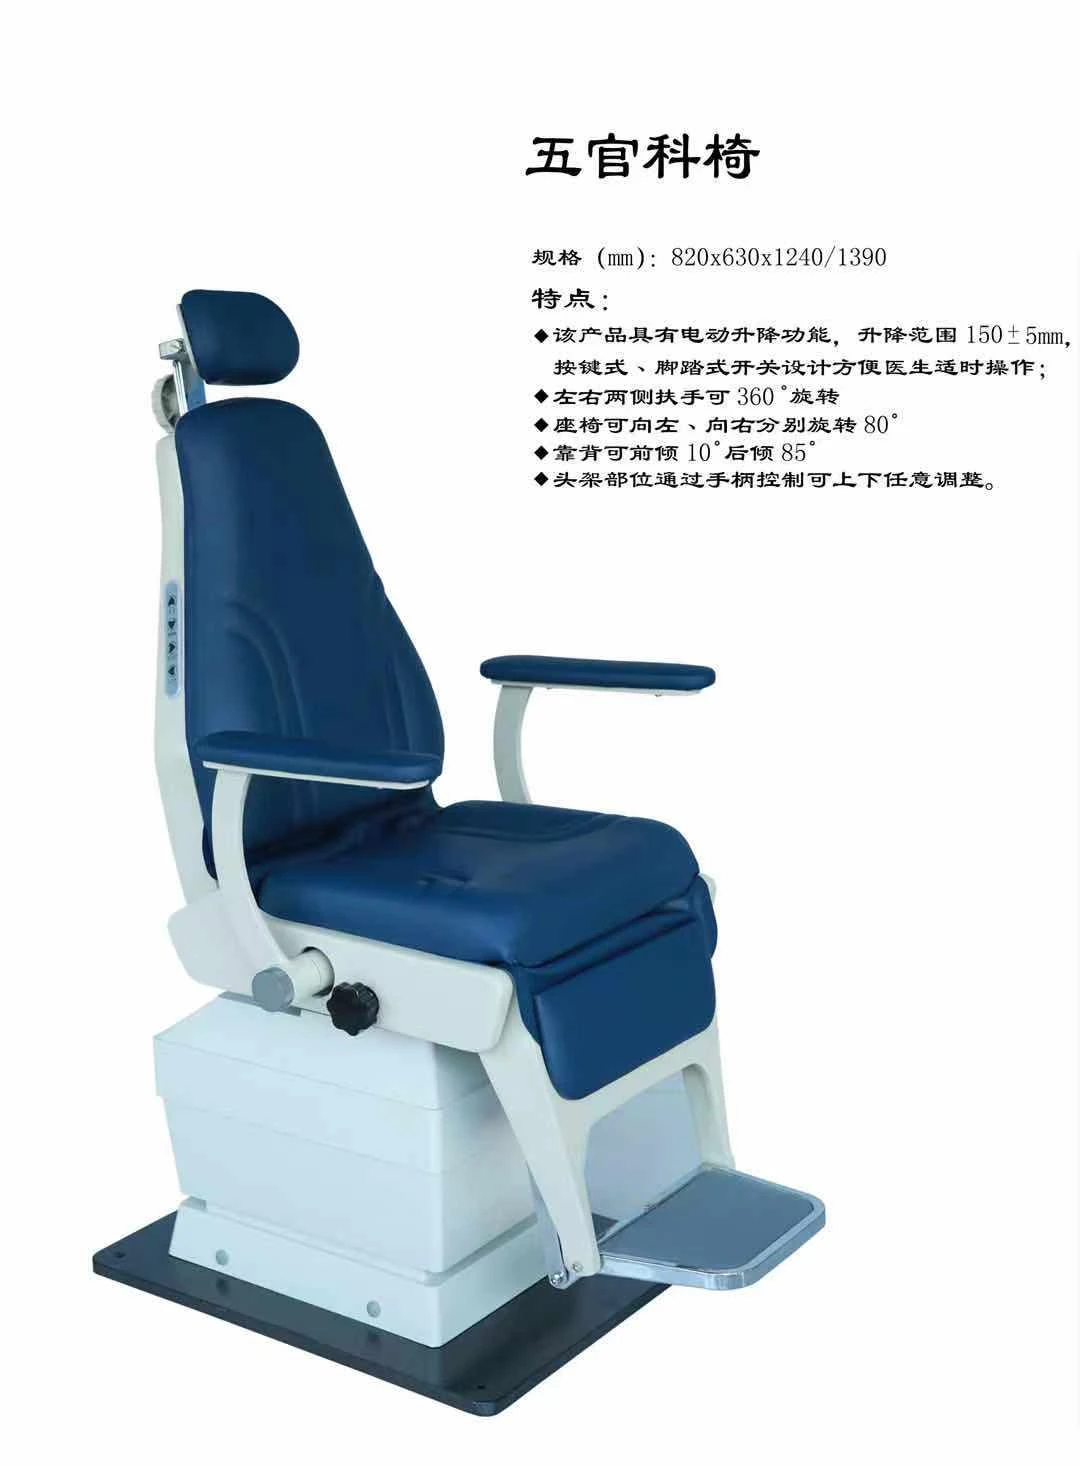 Electric surgical room ophthalmic ENT operation examination chair